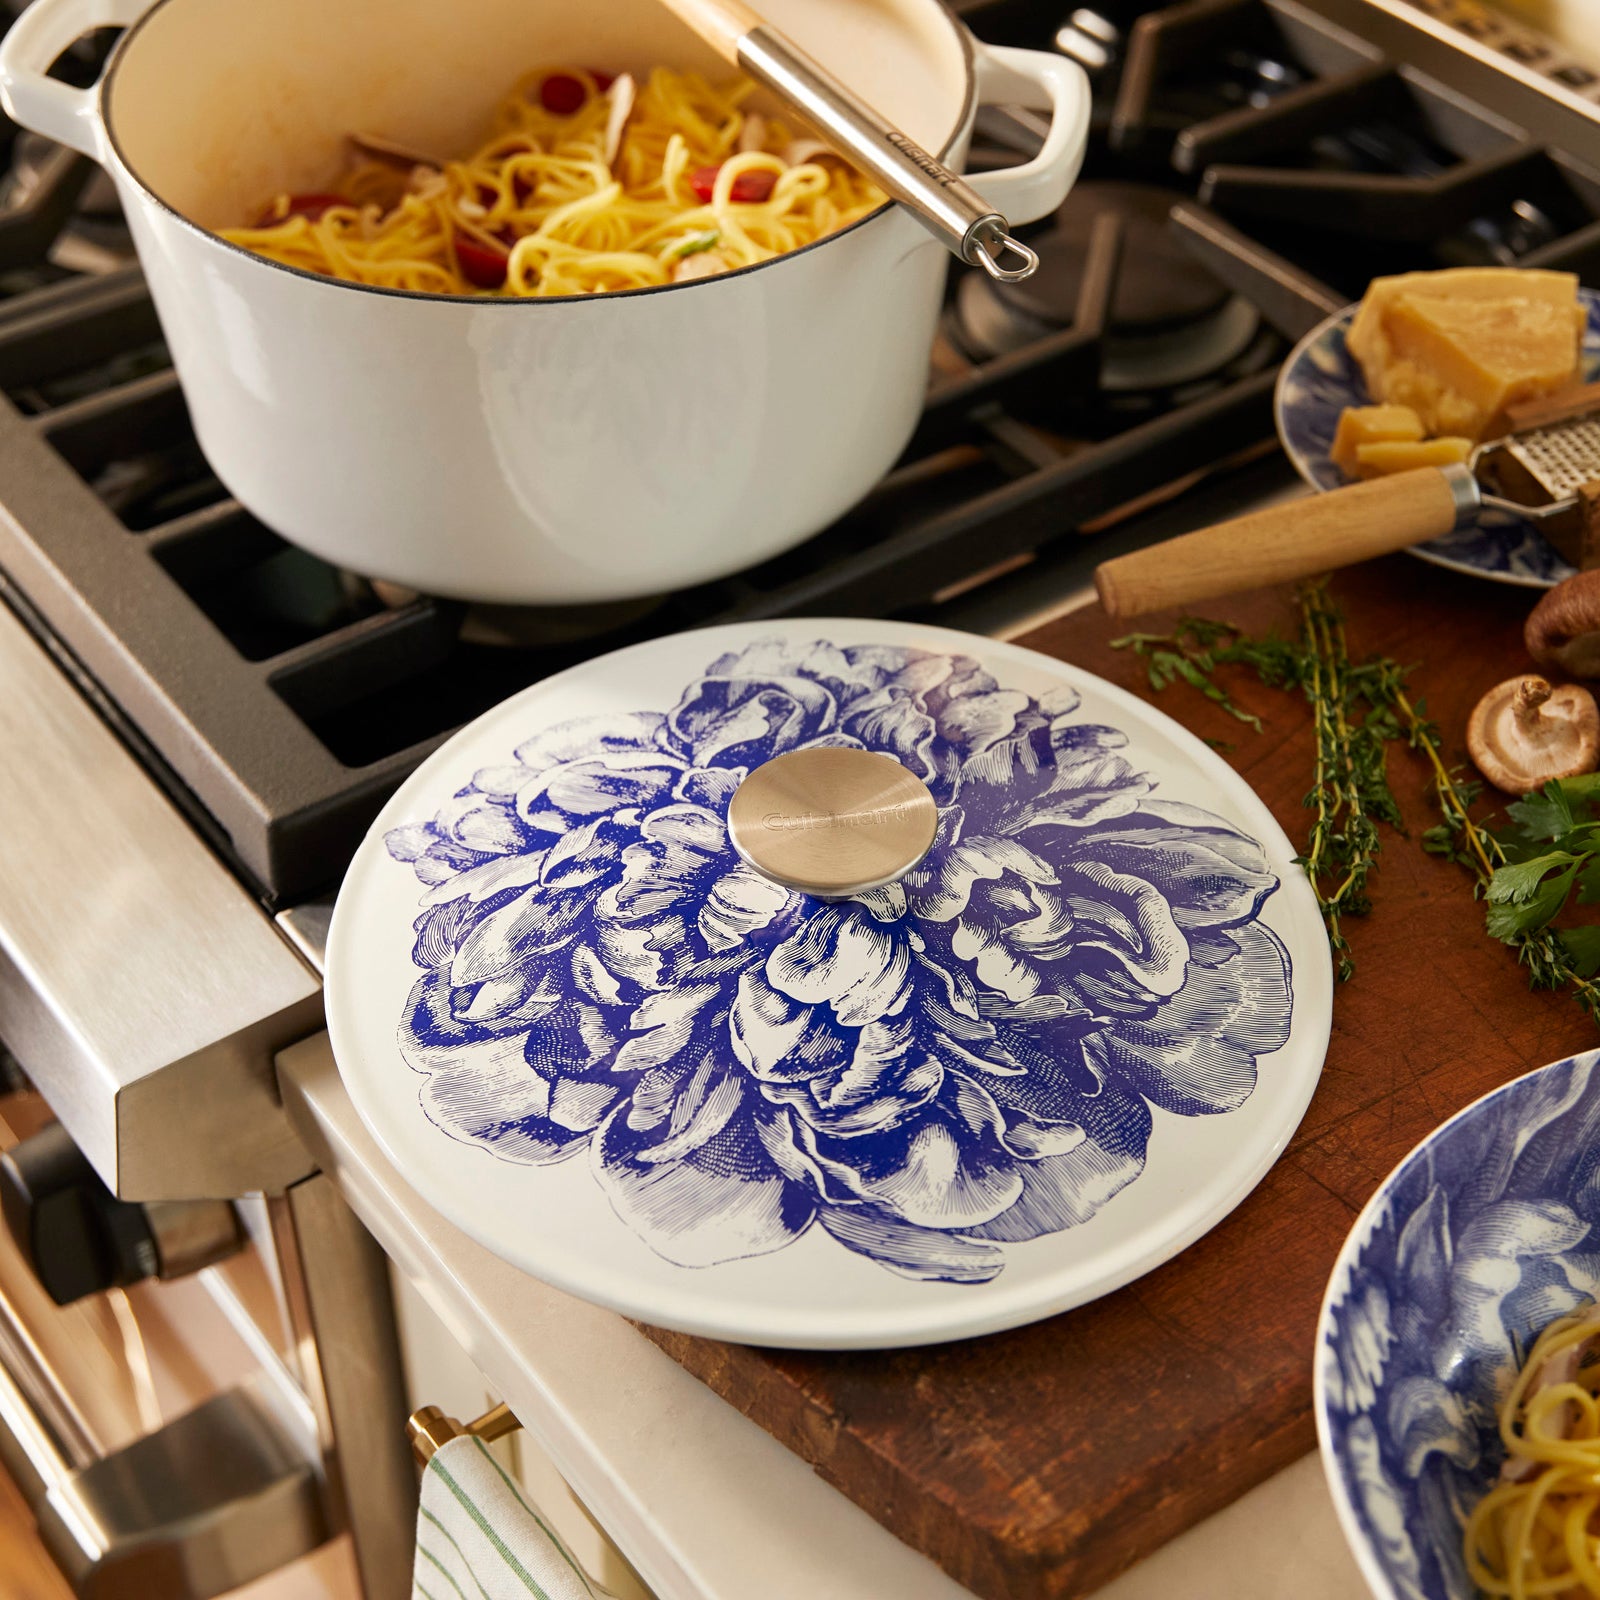 Caskata X Cuisinart Limited Edition Collection finds its way onto everything from cast iron cookware to high-fired porcelain in this romantic, fashion-forward collection originally designed for the world-famous Met Gala from Caskata.